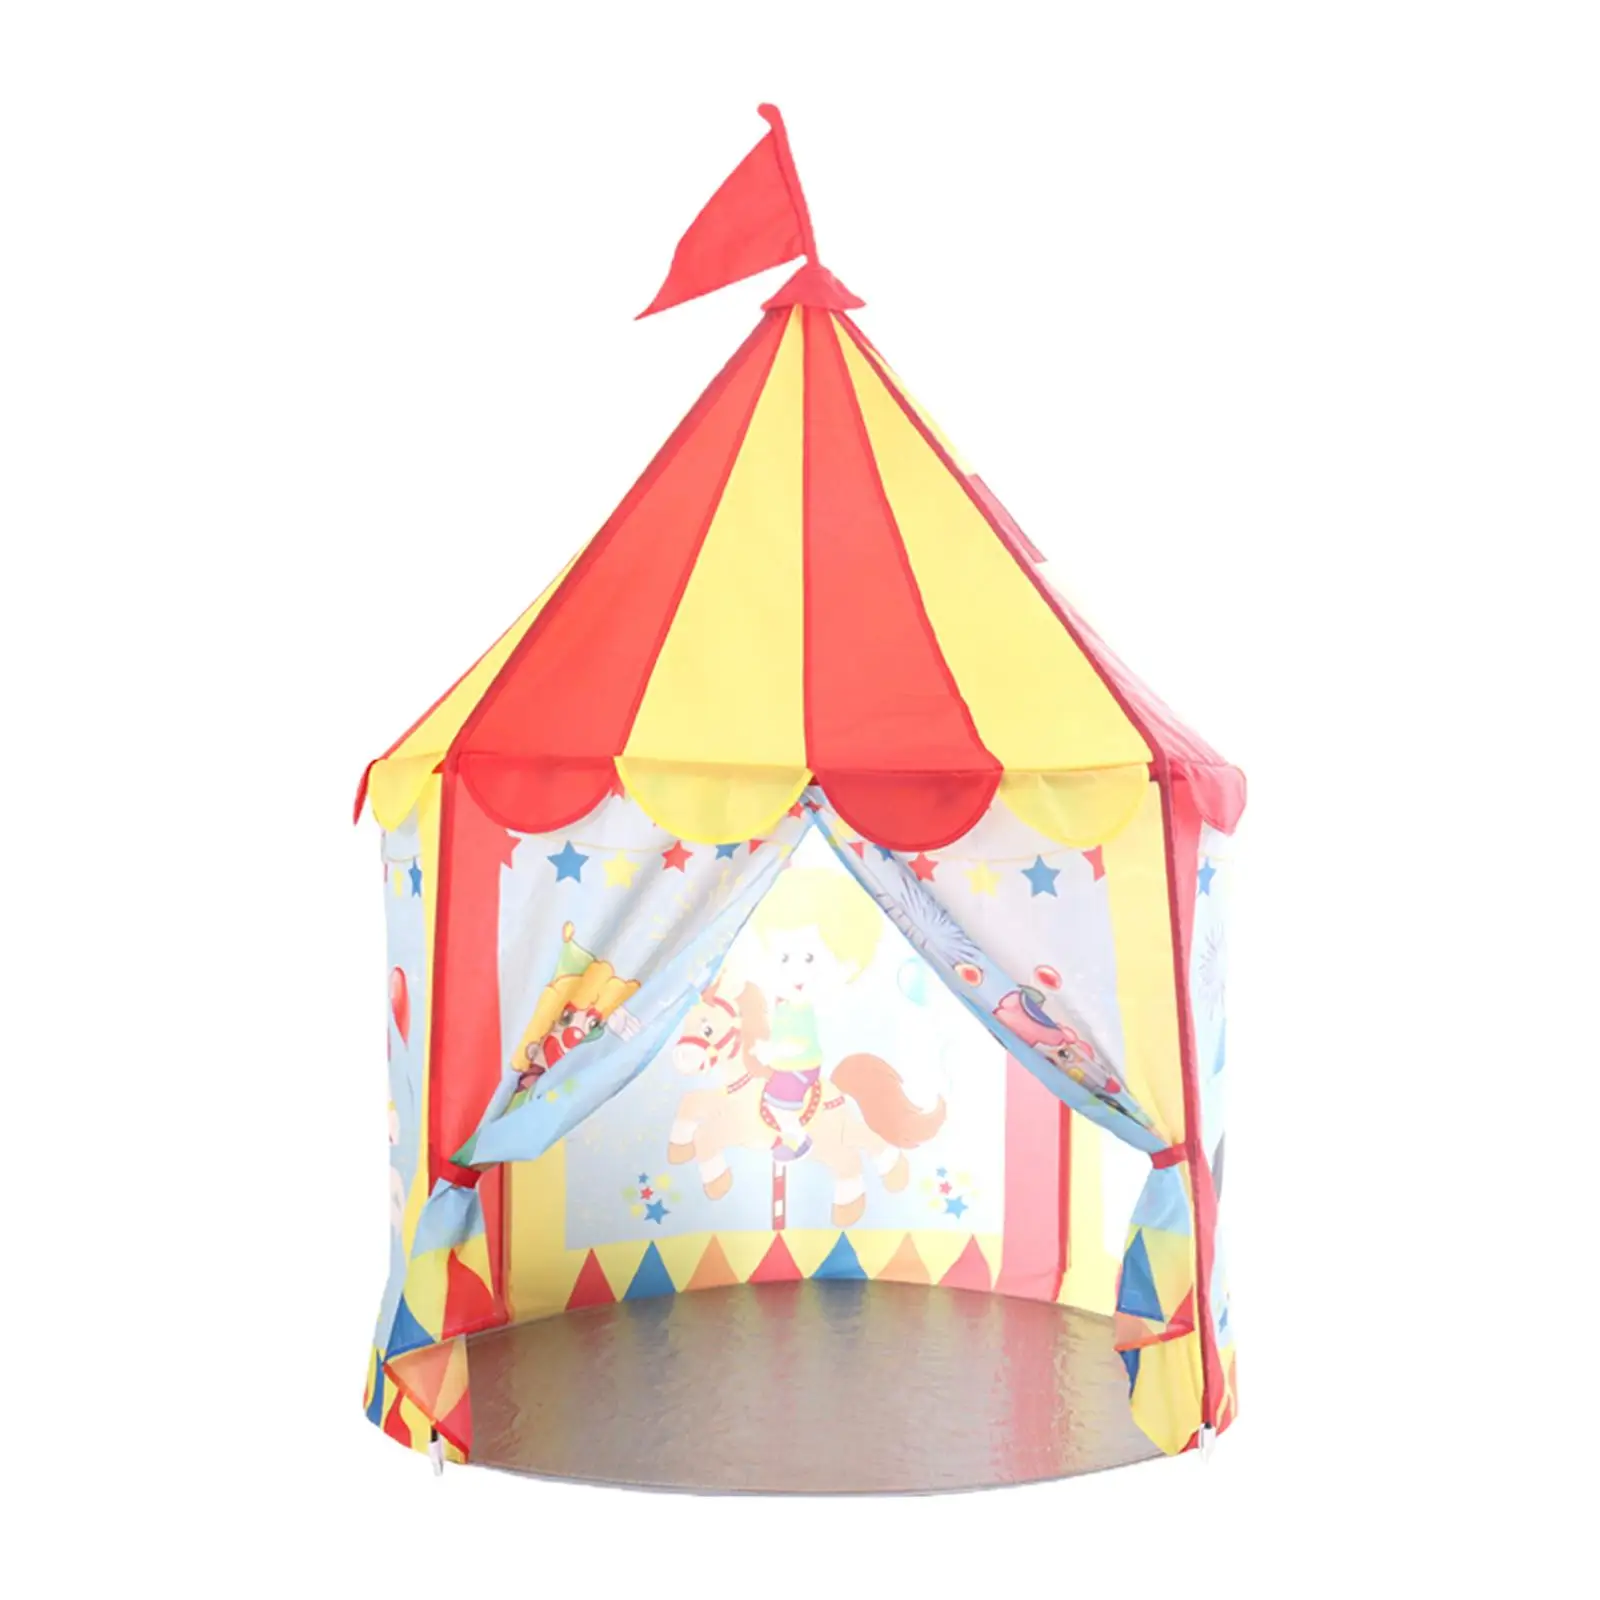 Prince Castle Tent Play Teepee Foldable Best Gift Portable Play Tent House Children Castle Playhous for garden Yard Baby